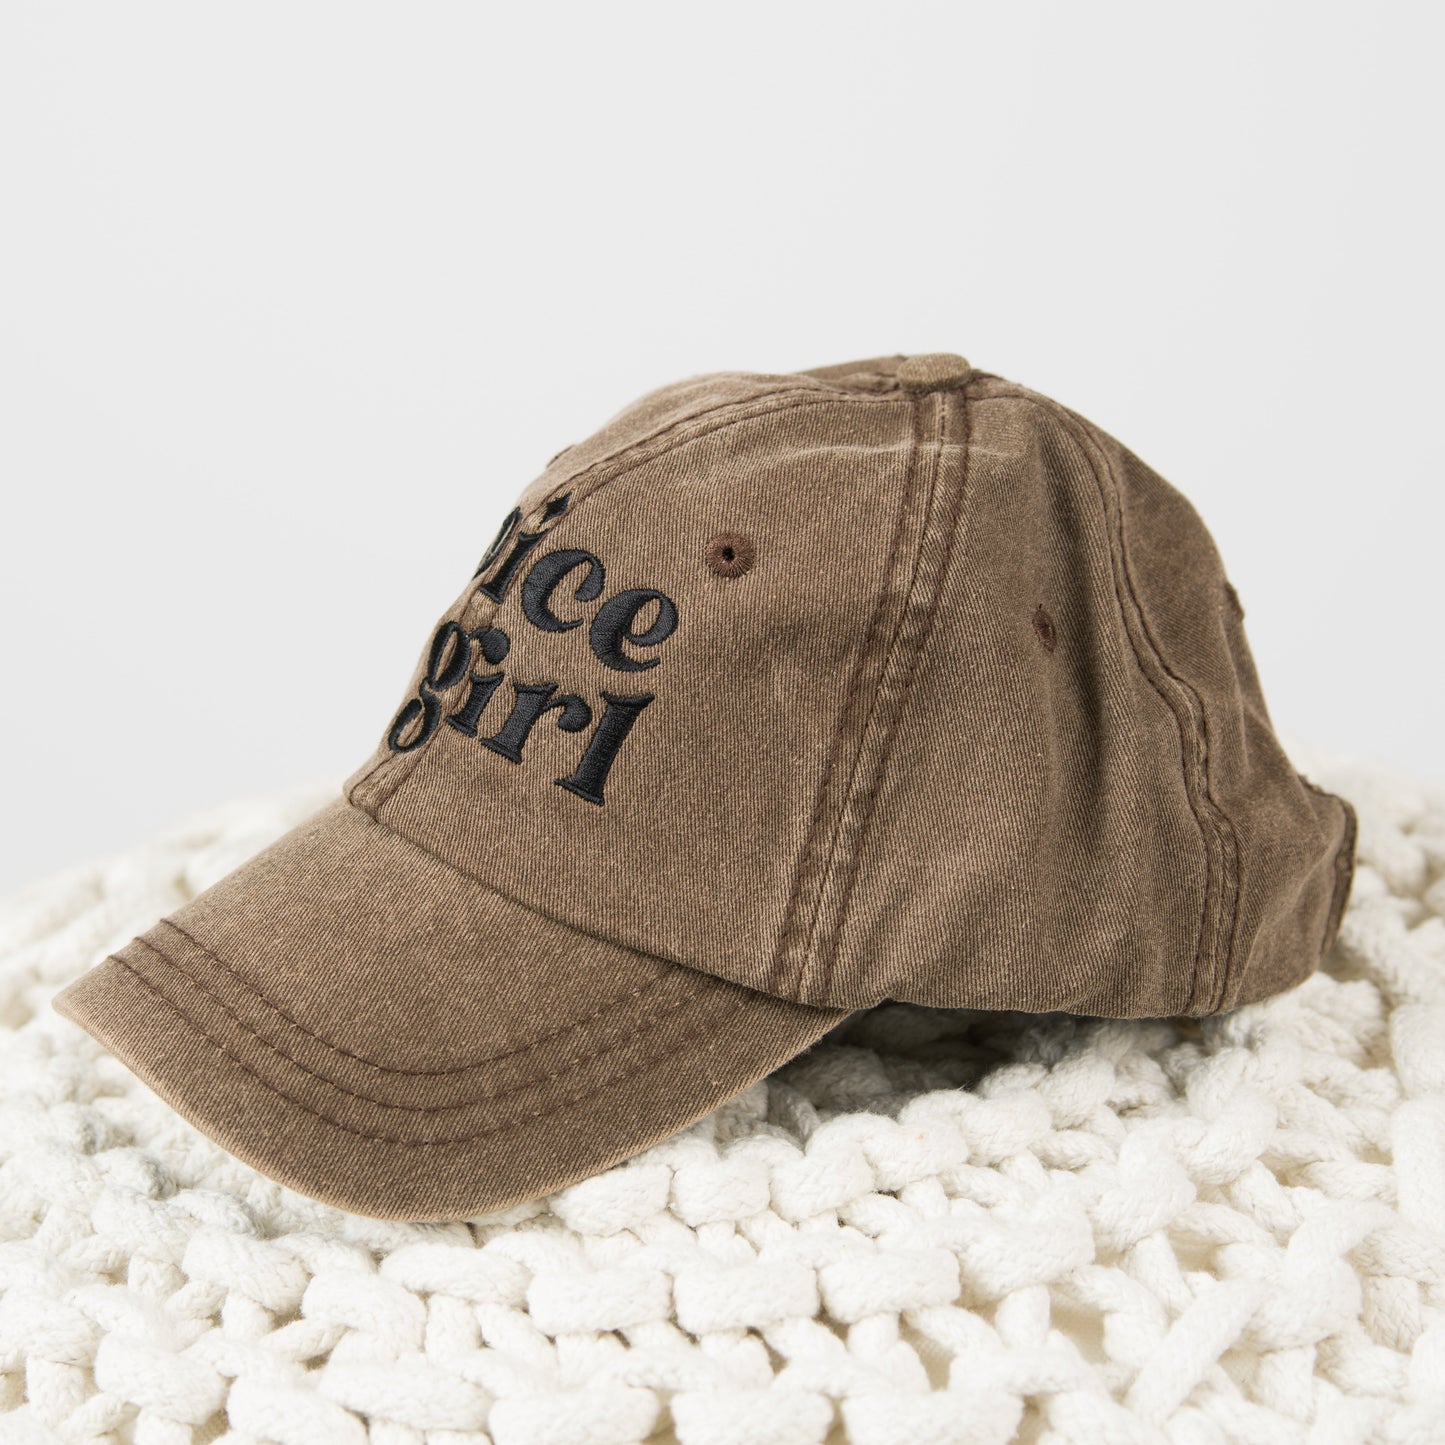 Embroidered Spice Girl | Canvas Hat